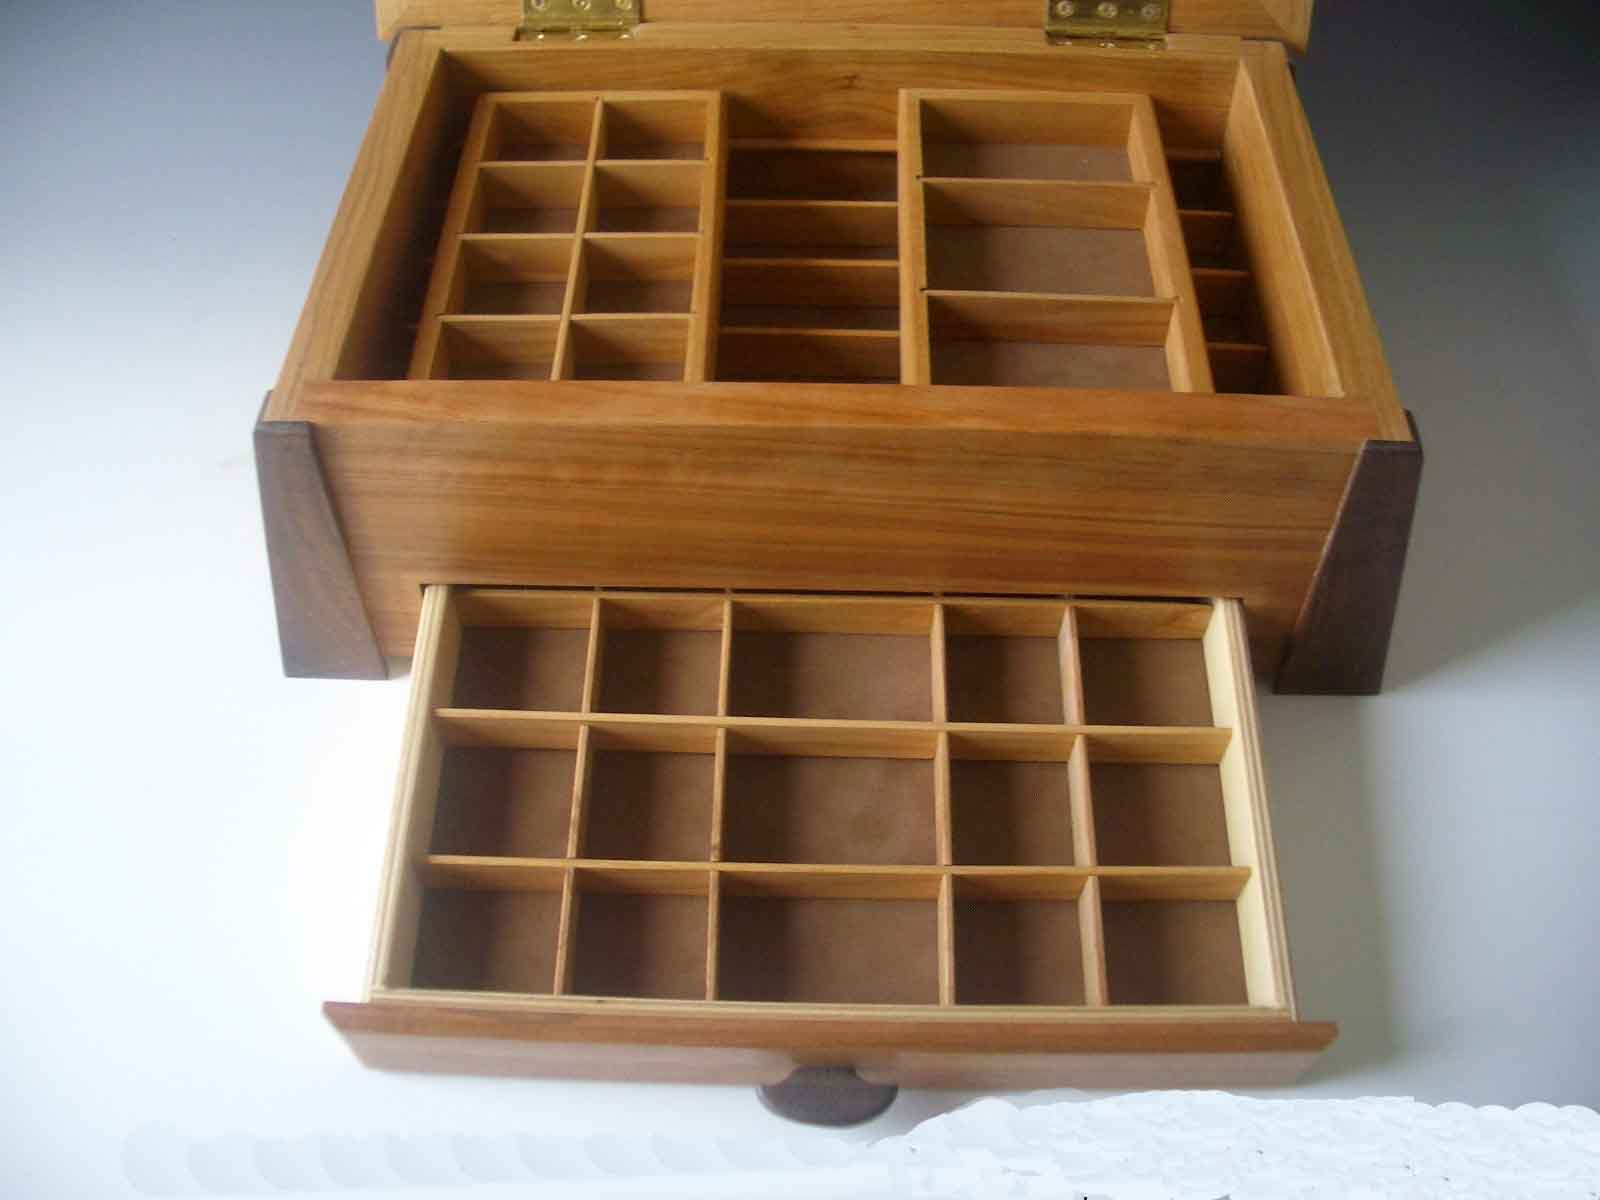 Handmade solid wood jewelry boxes made of various exotic woods; this 